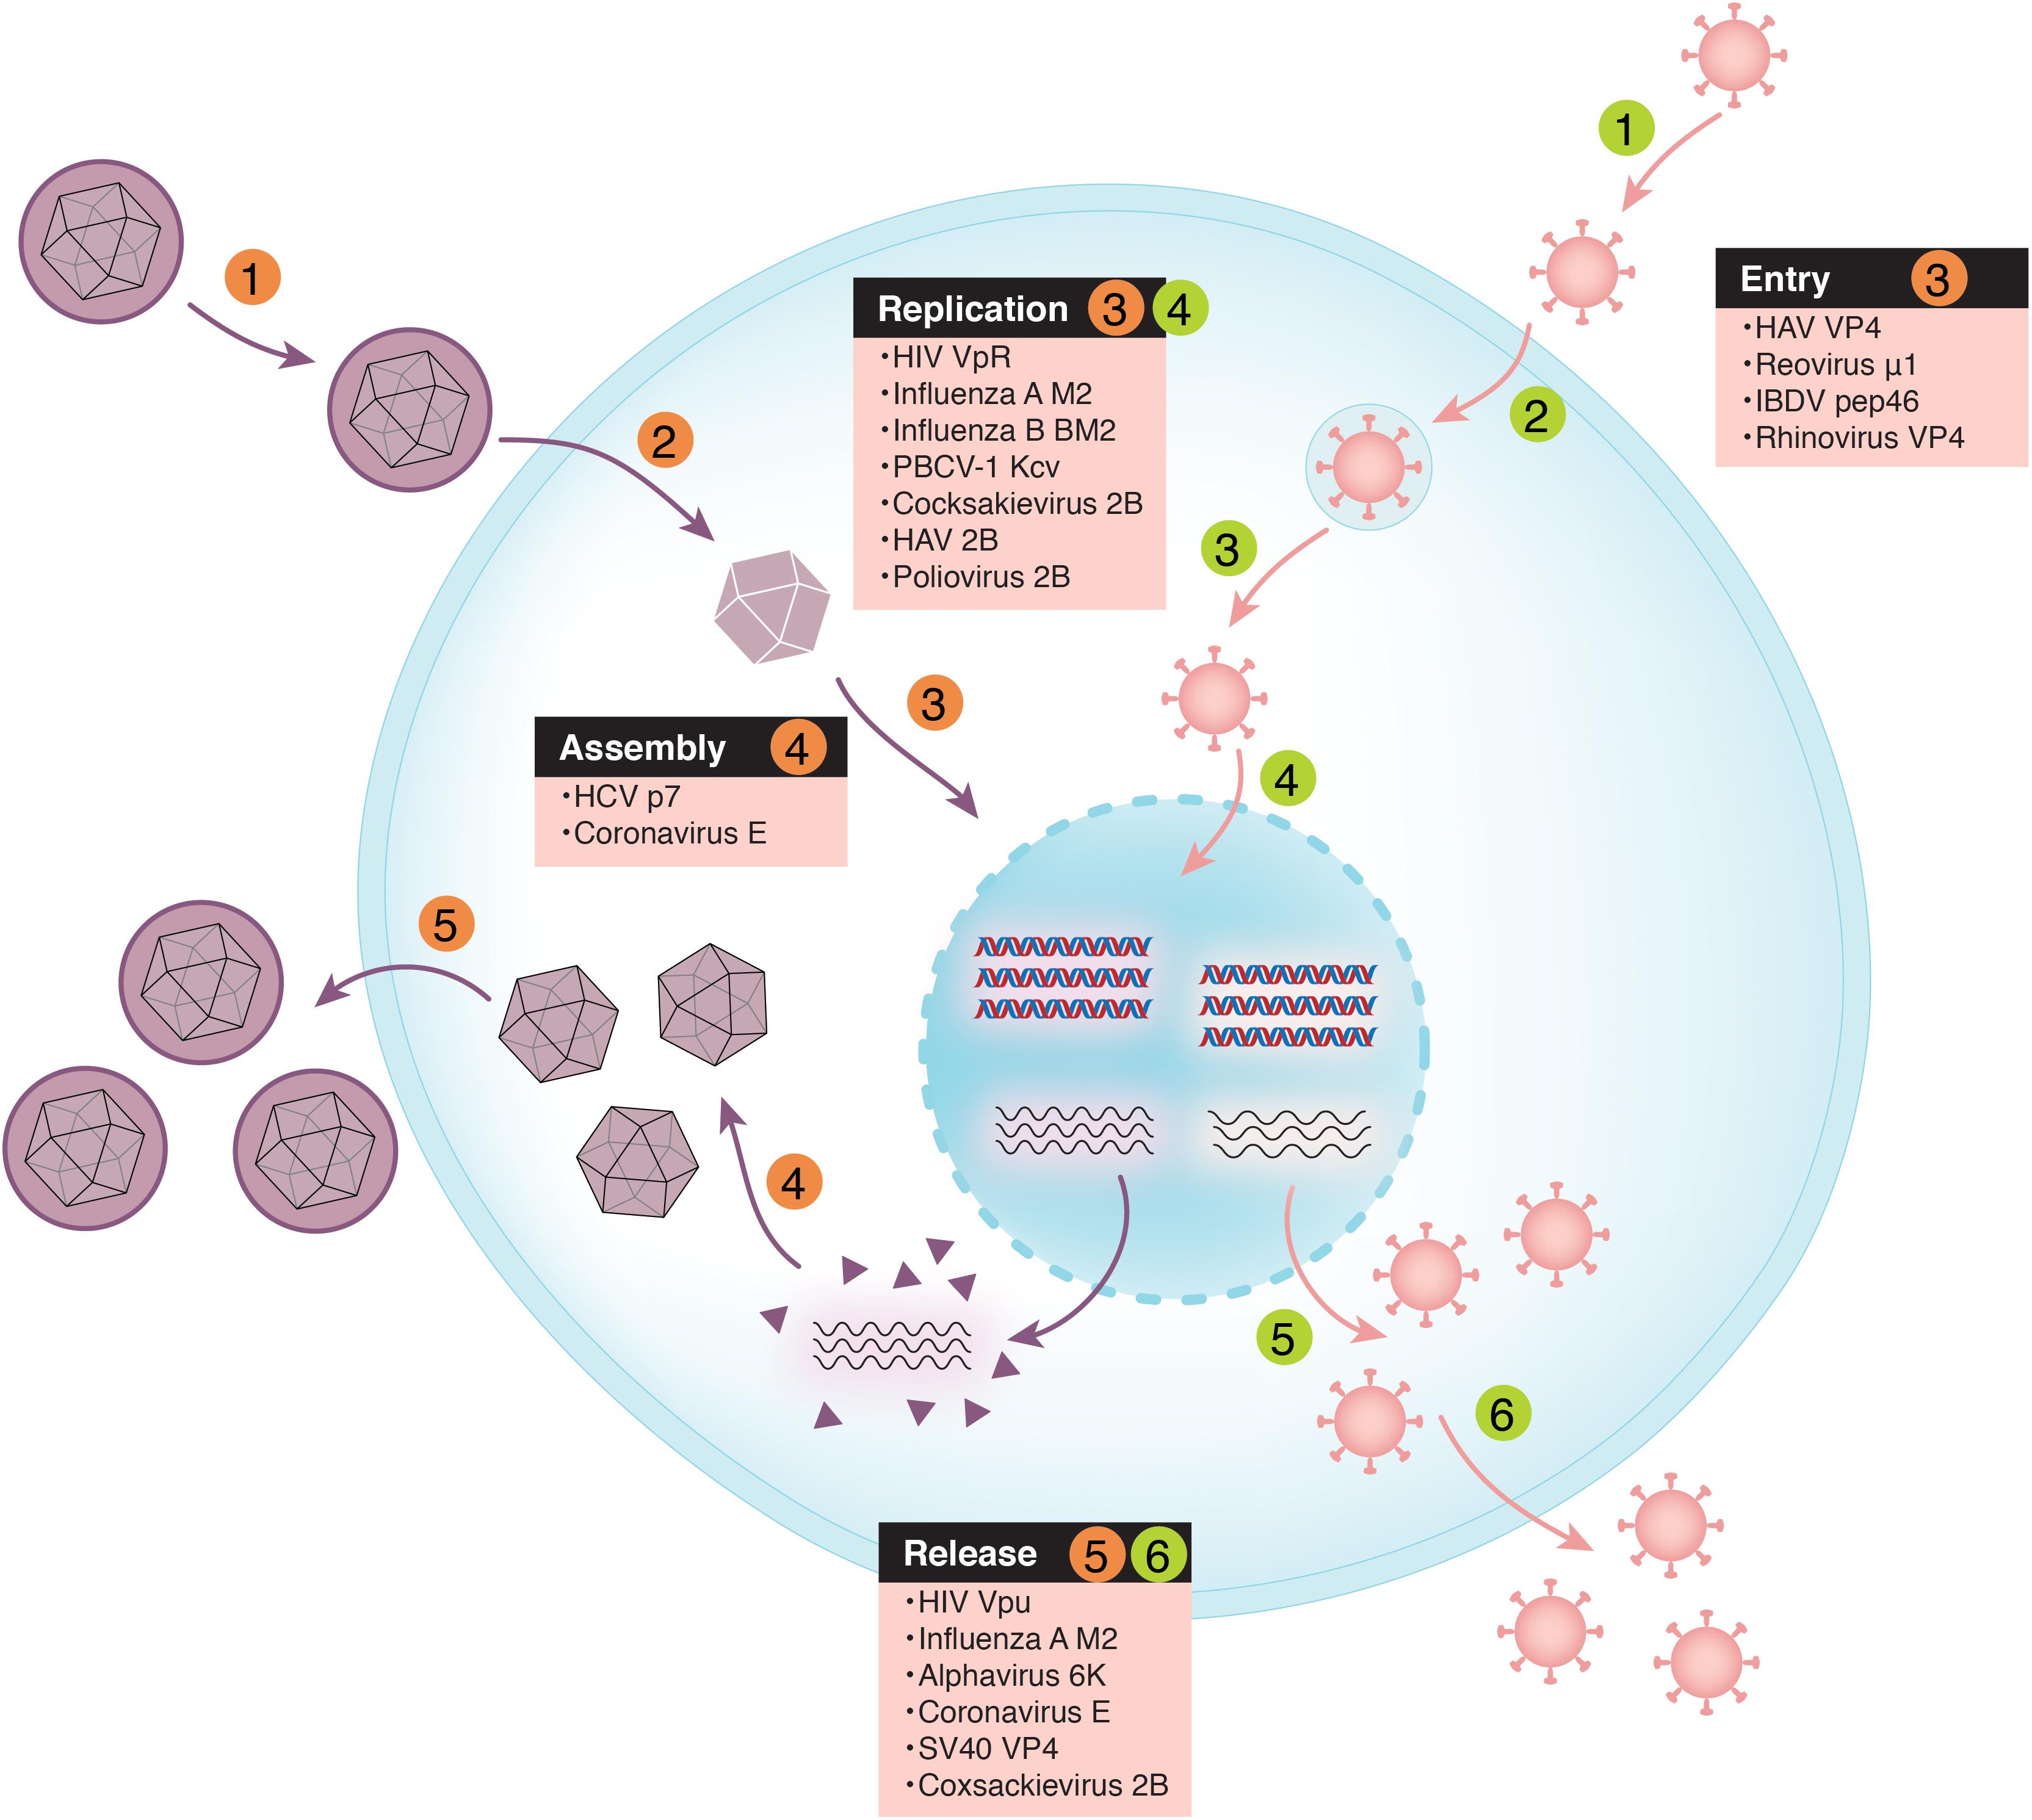 General schematic showing various steps in the life cycle of enveloped and non-enveloped viruses and the involvement of viroporins or viral membrane penetrating peptides.